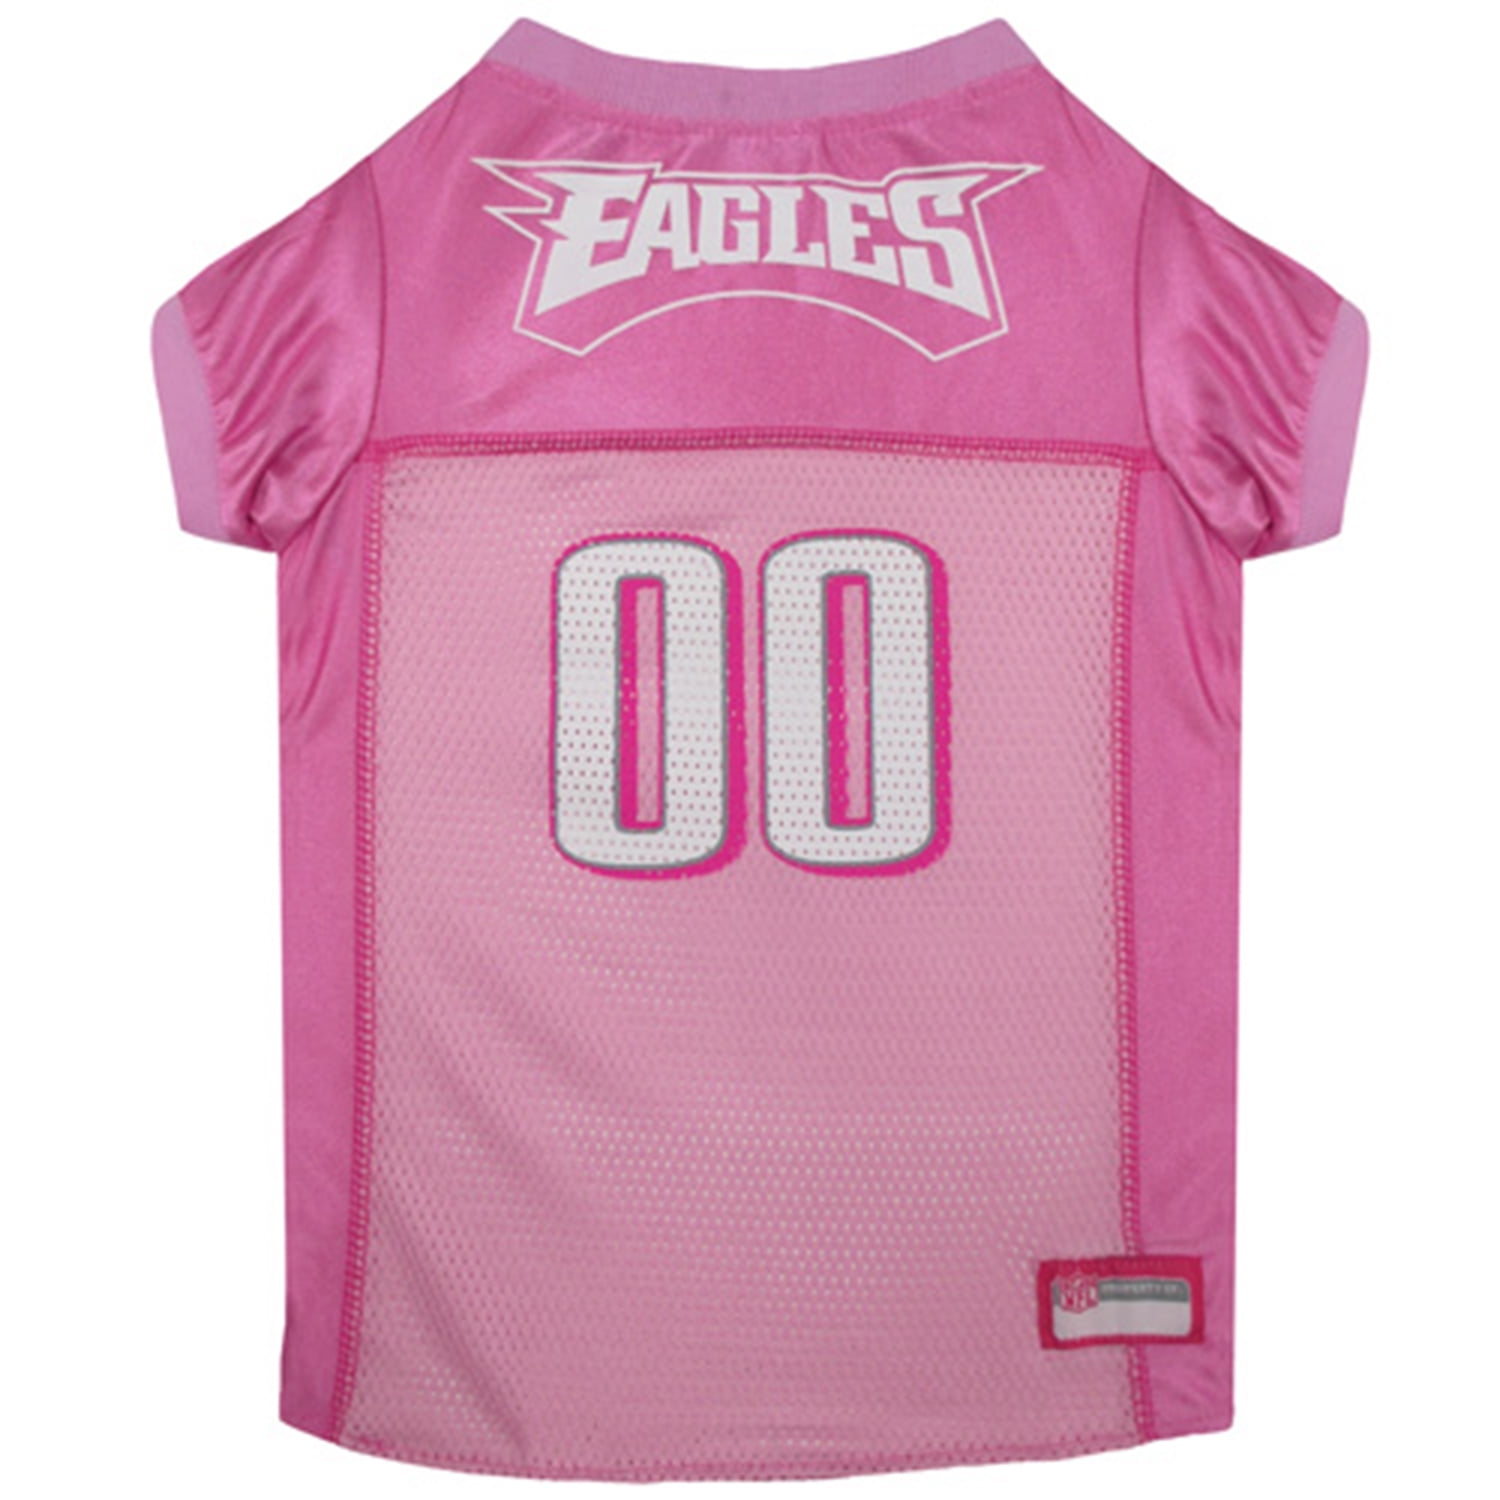 Pets First NFL Philadelphia Eagles Pink Jersey for DOGS & CATS, Licensed  Football Jerseys - Extra Small 